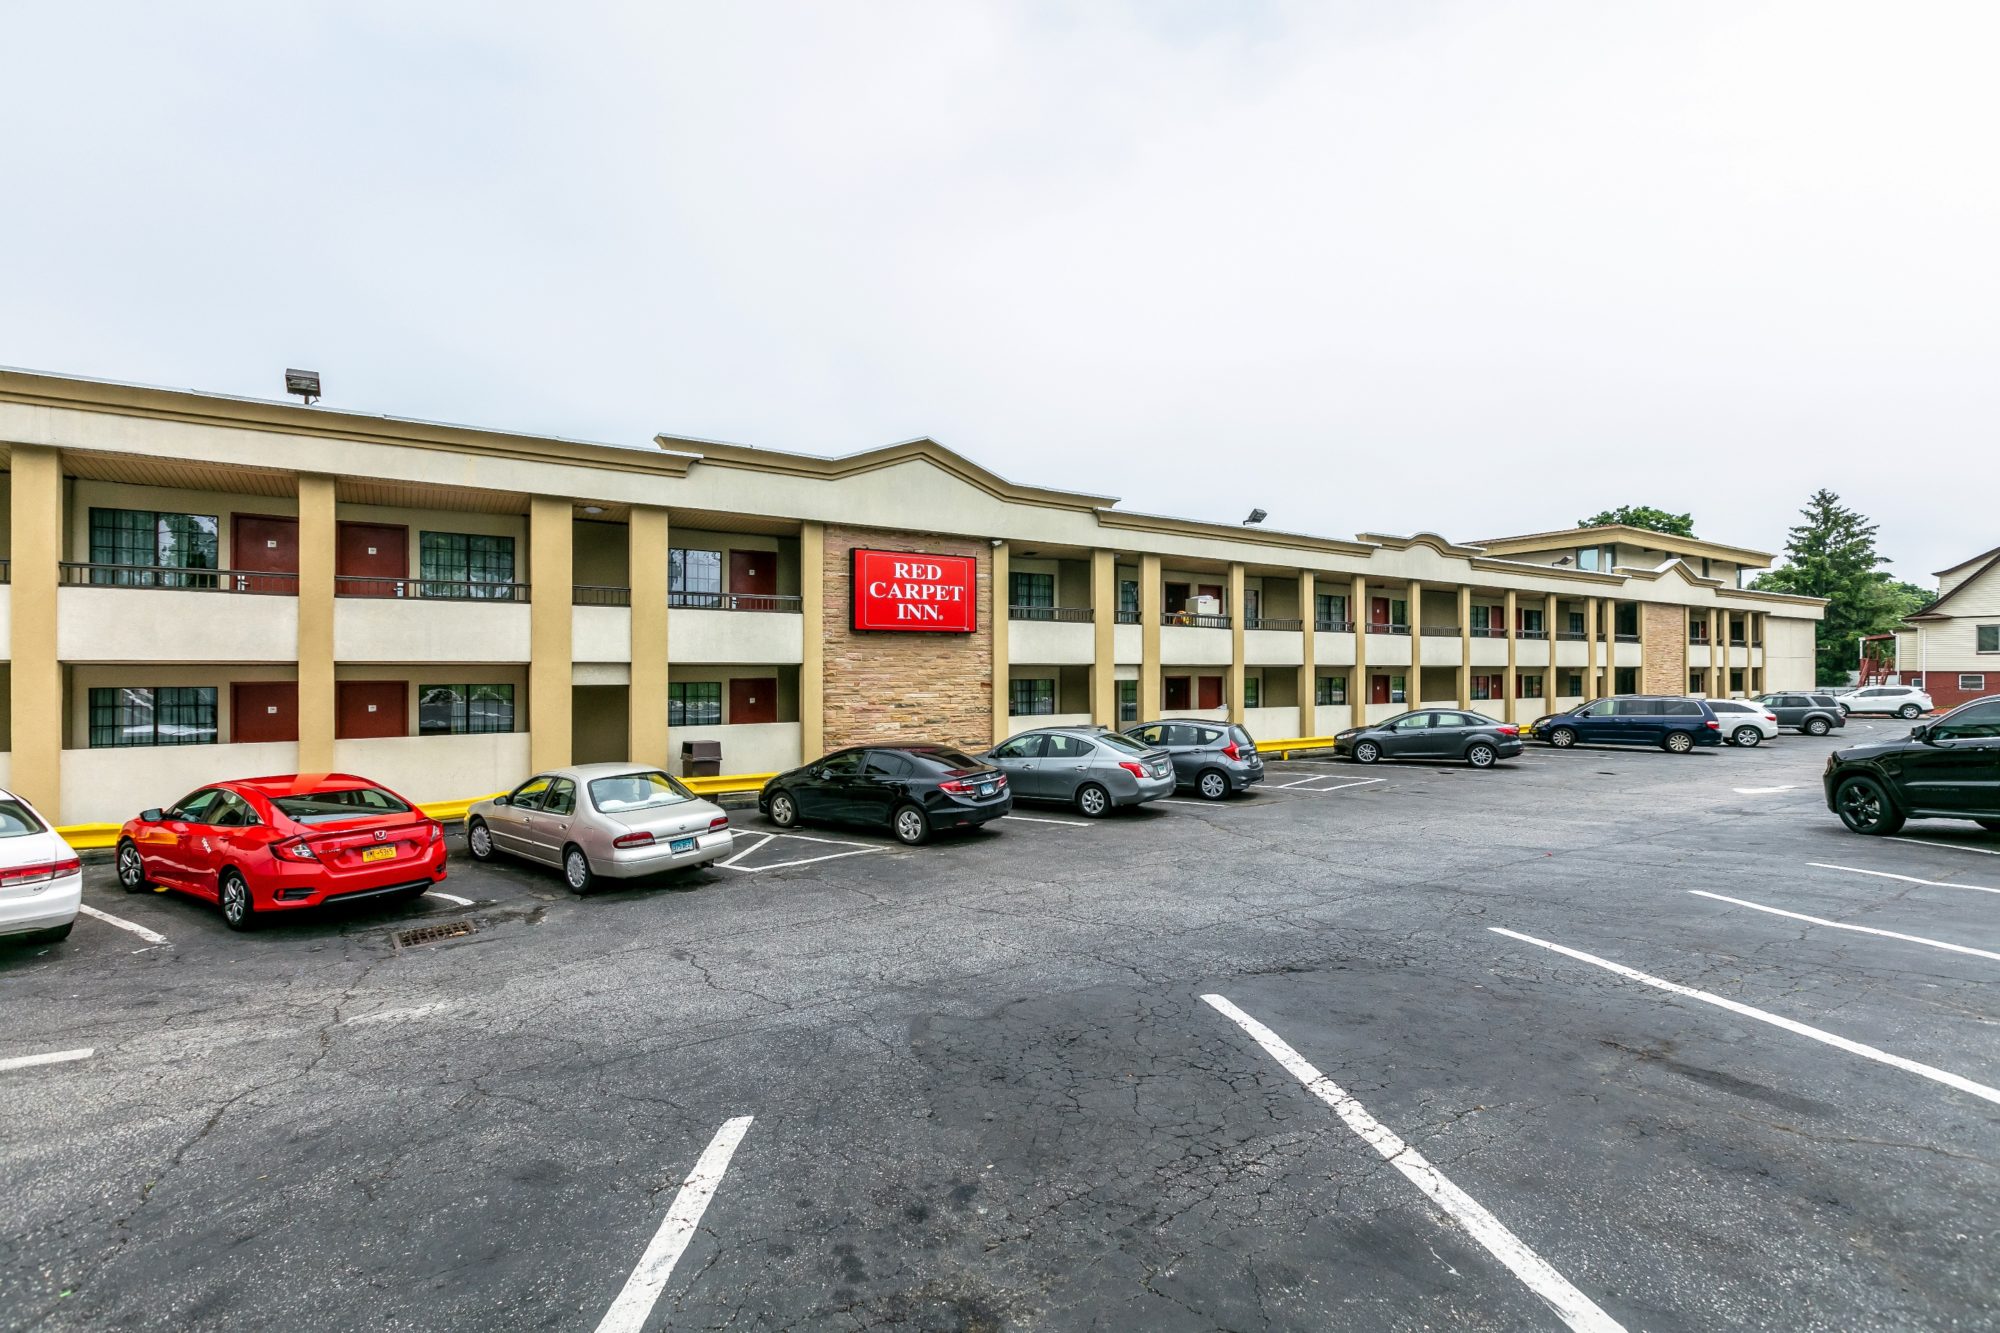 Two storey building with exterior walk ways and parking area